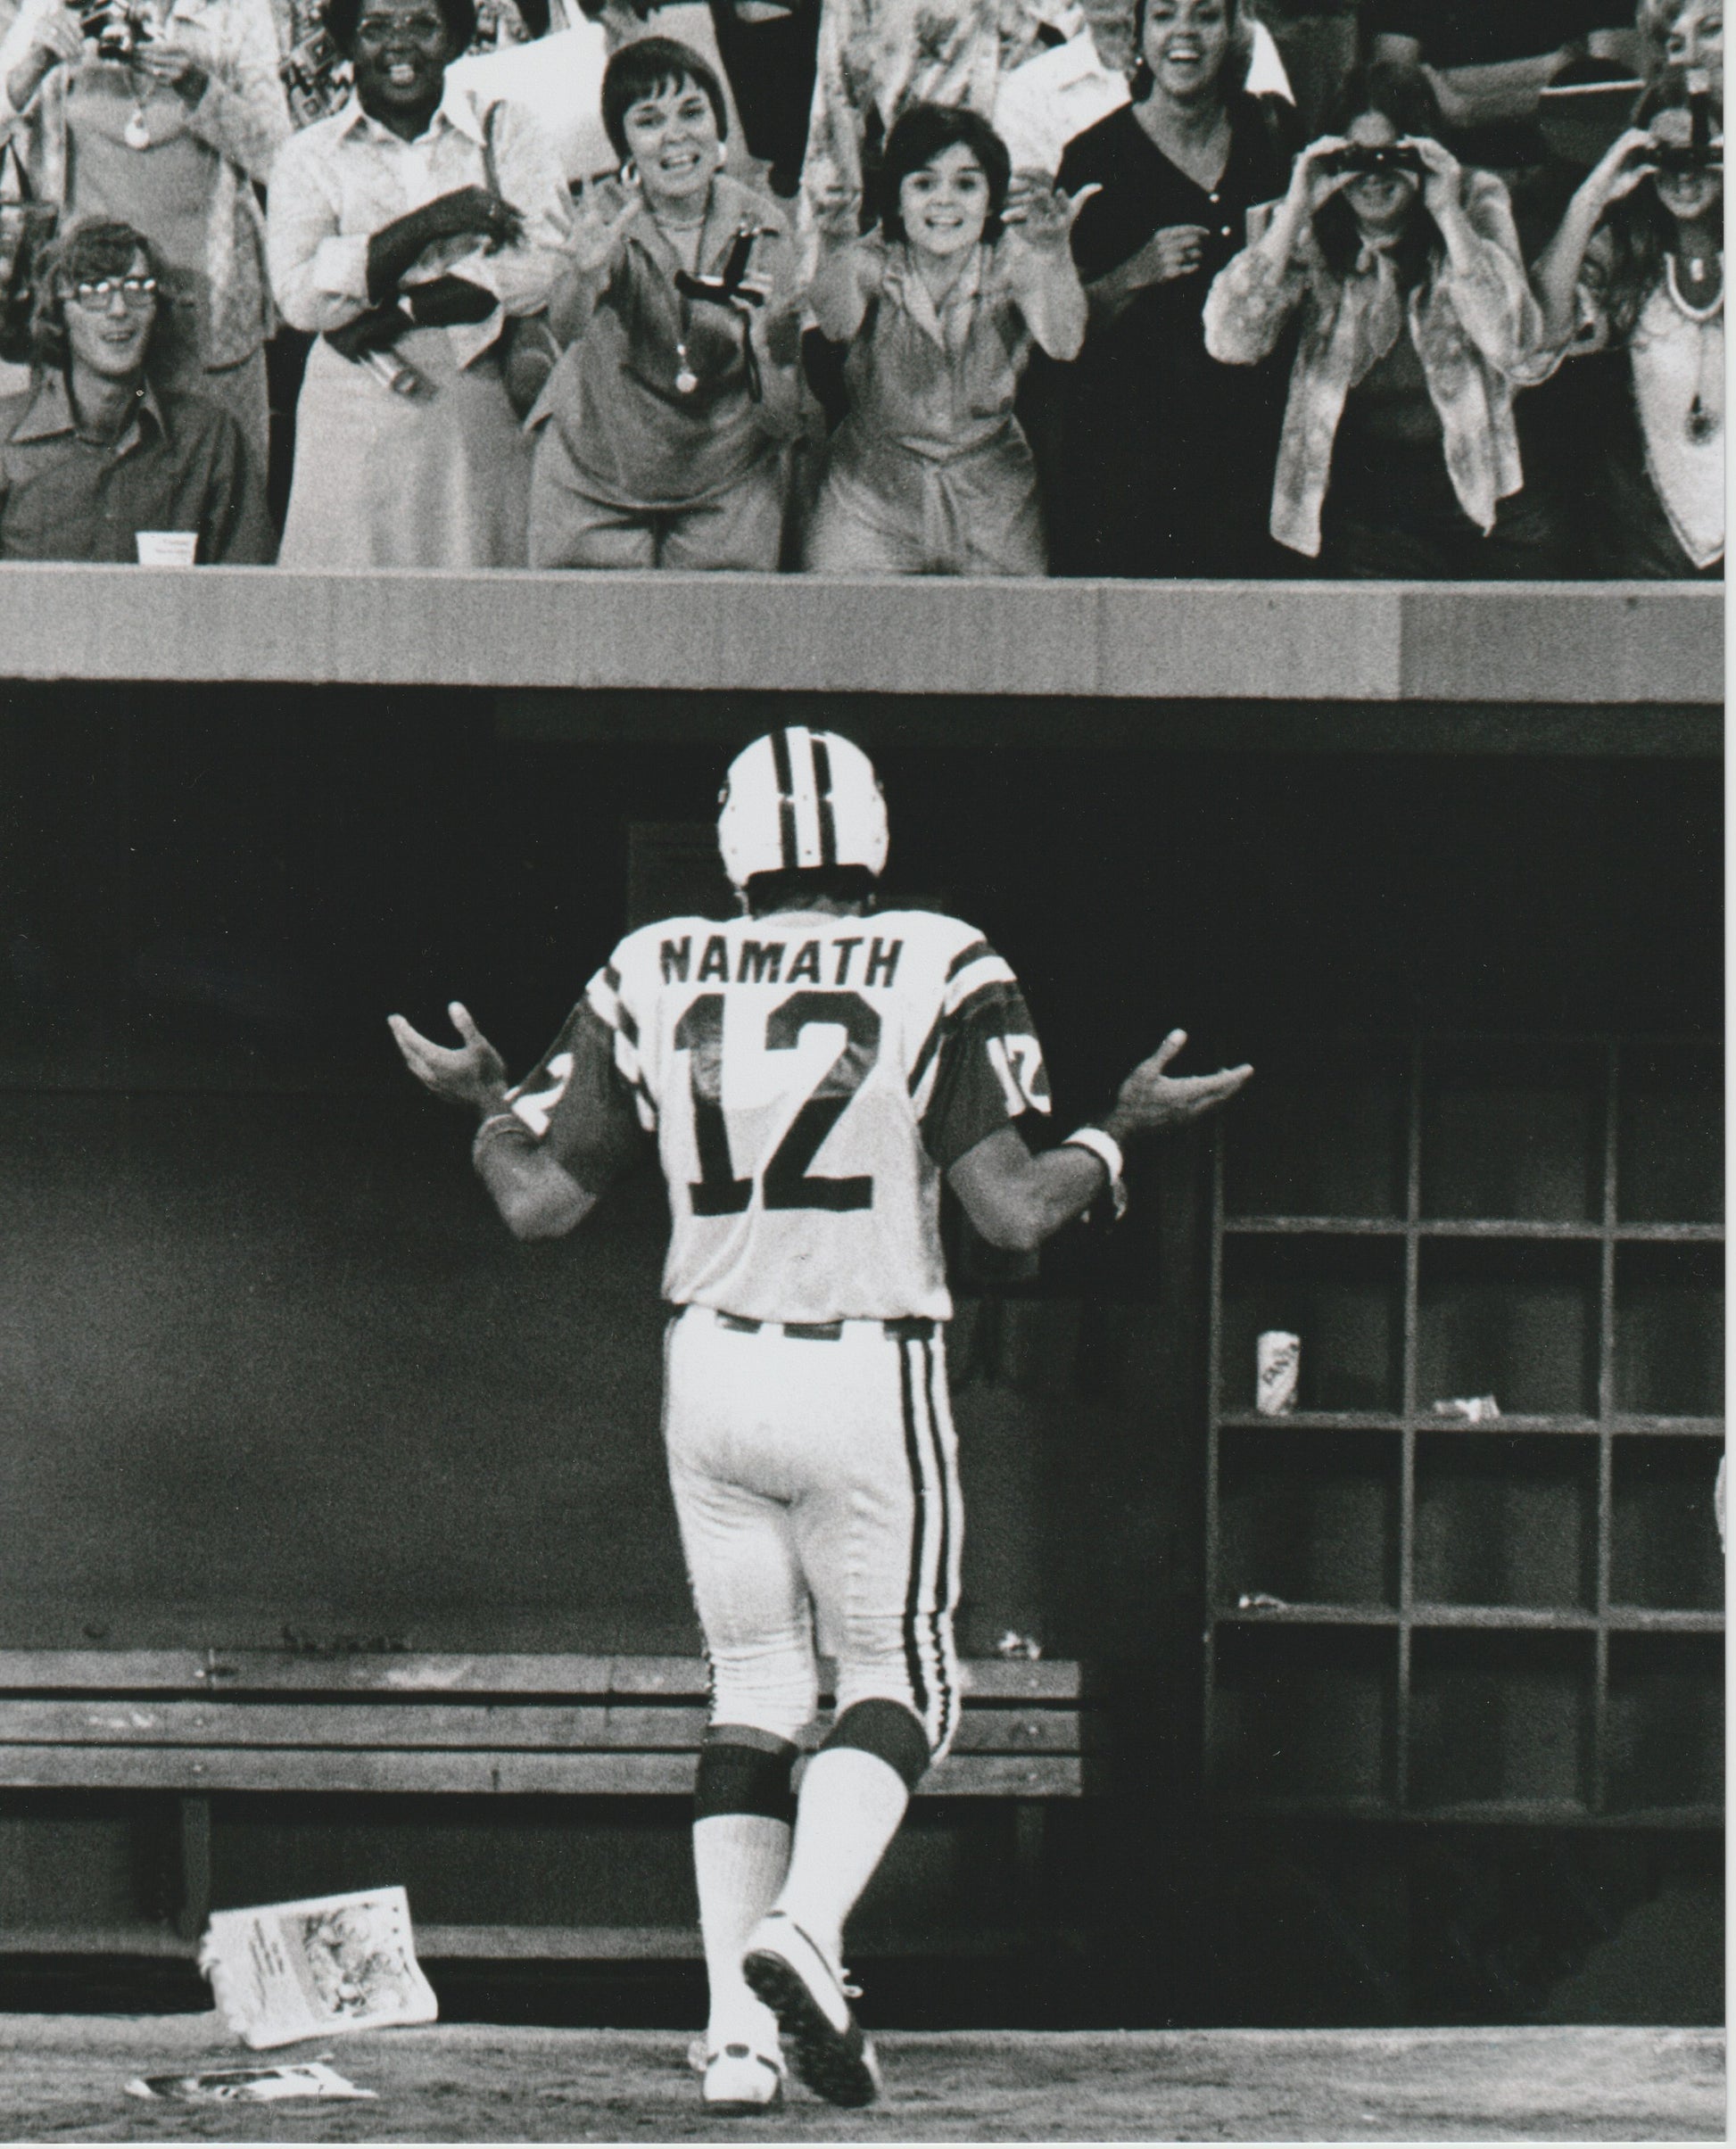 New York Jets Quarterback "Broadway" Joe Namath Acknowledging The Fans At The End Of A Game, 8x10 Photograph